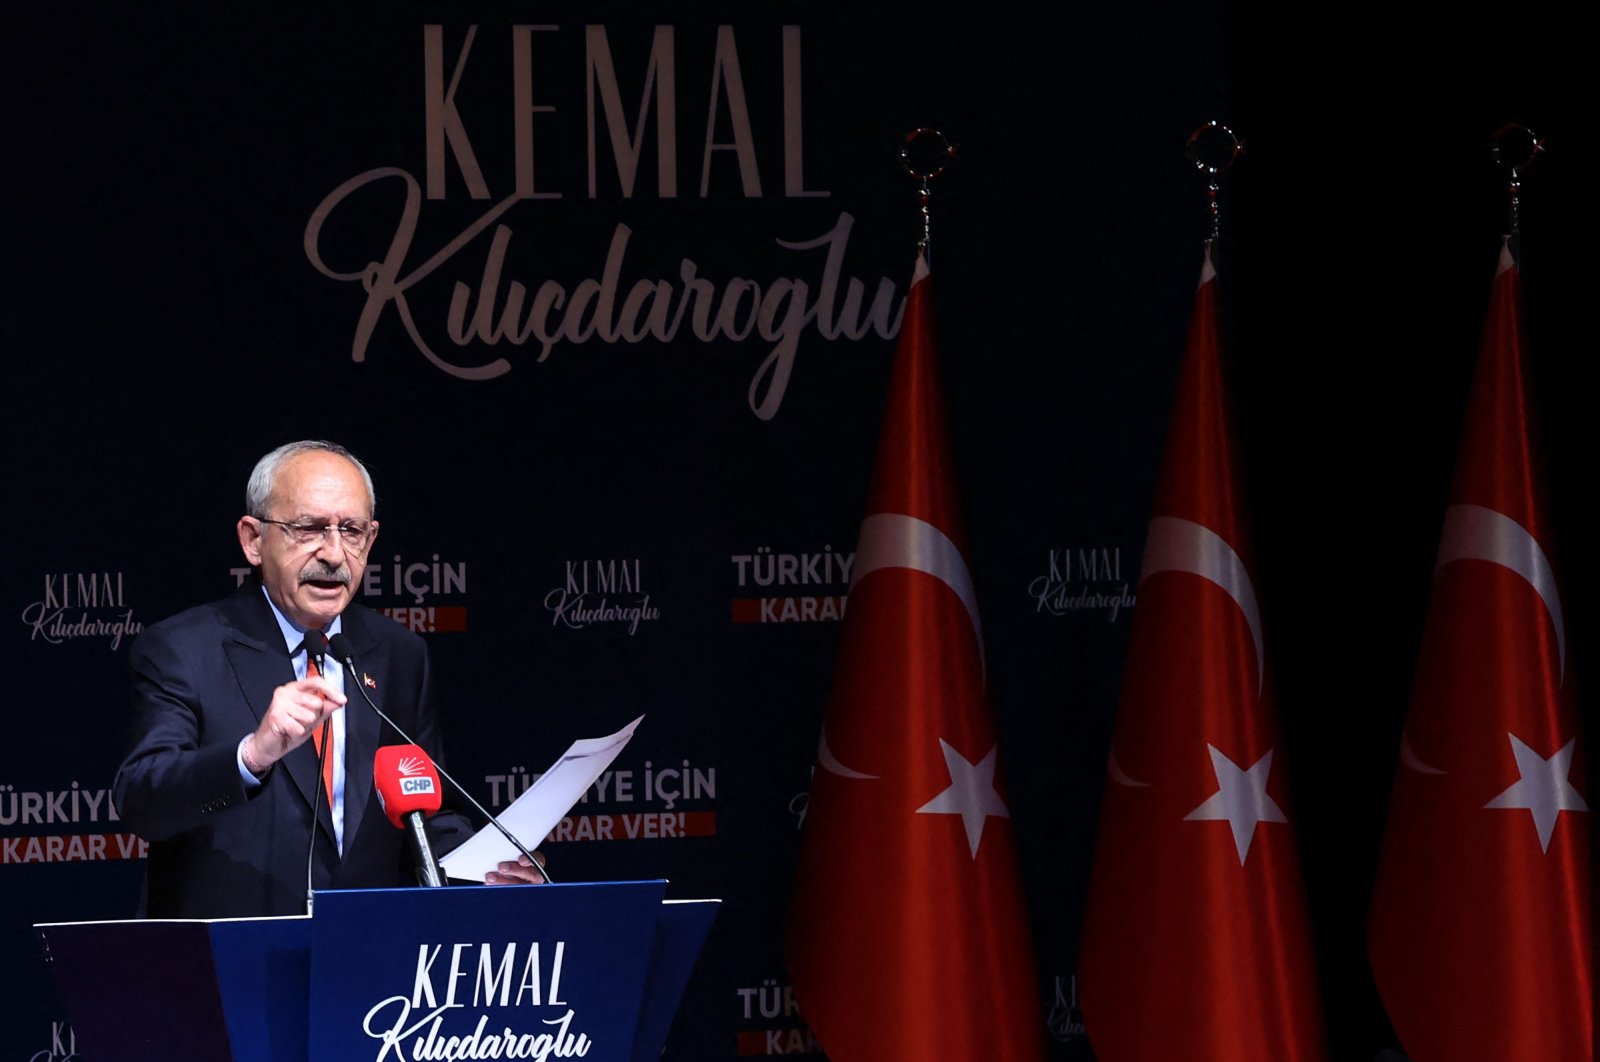 Kemal Kılıçdaroğlu, leader of the Republican People&#039;s Party (CHP) and the joint presidential candidate of the Nation Alliance, speaks during a news conference in Ankara, Türkiye, May 18, 2023. (AFP Photo)